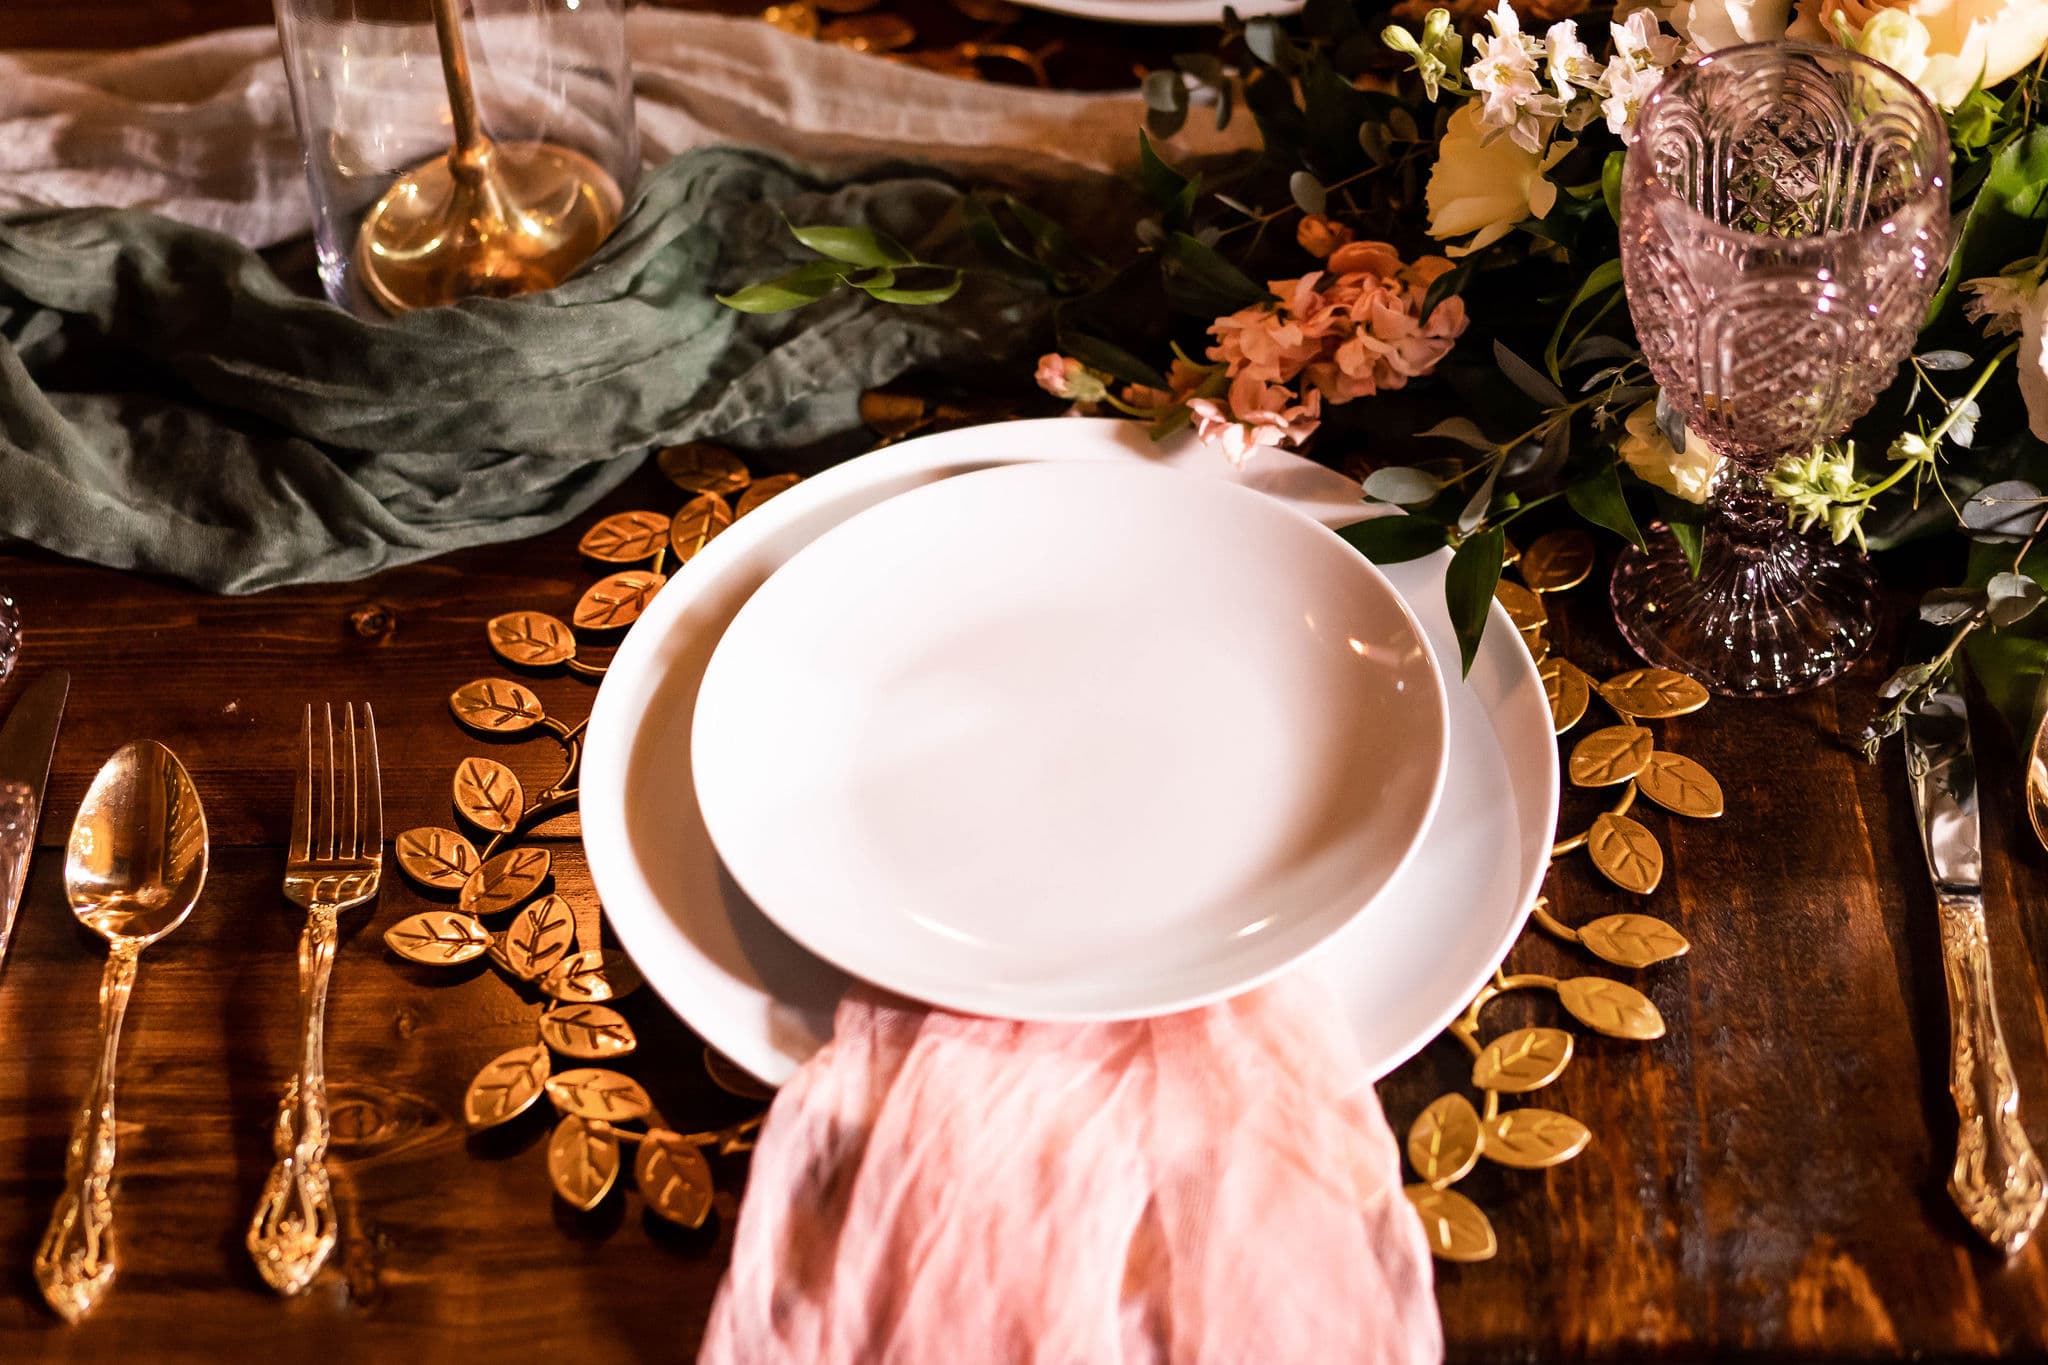 place setting on wedding day reception able with gold leaf charger and white plates whit pink napkin flowing from under them with gold flatware on natural wood table